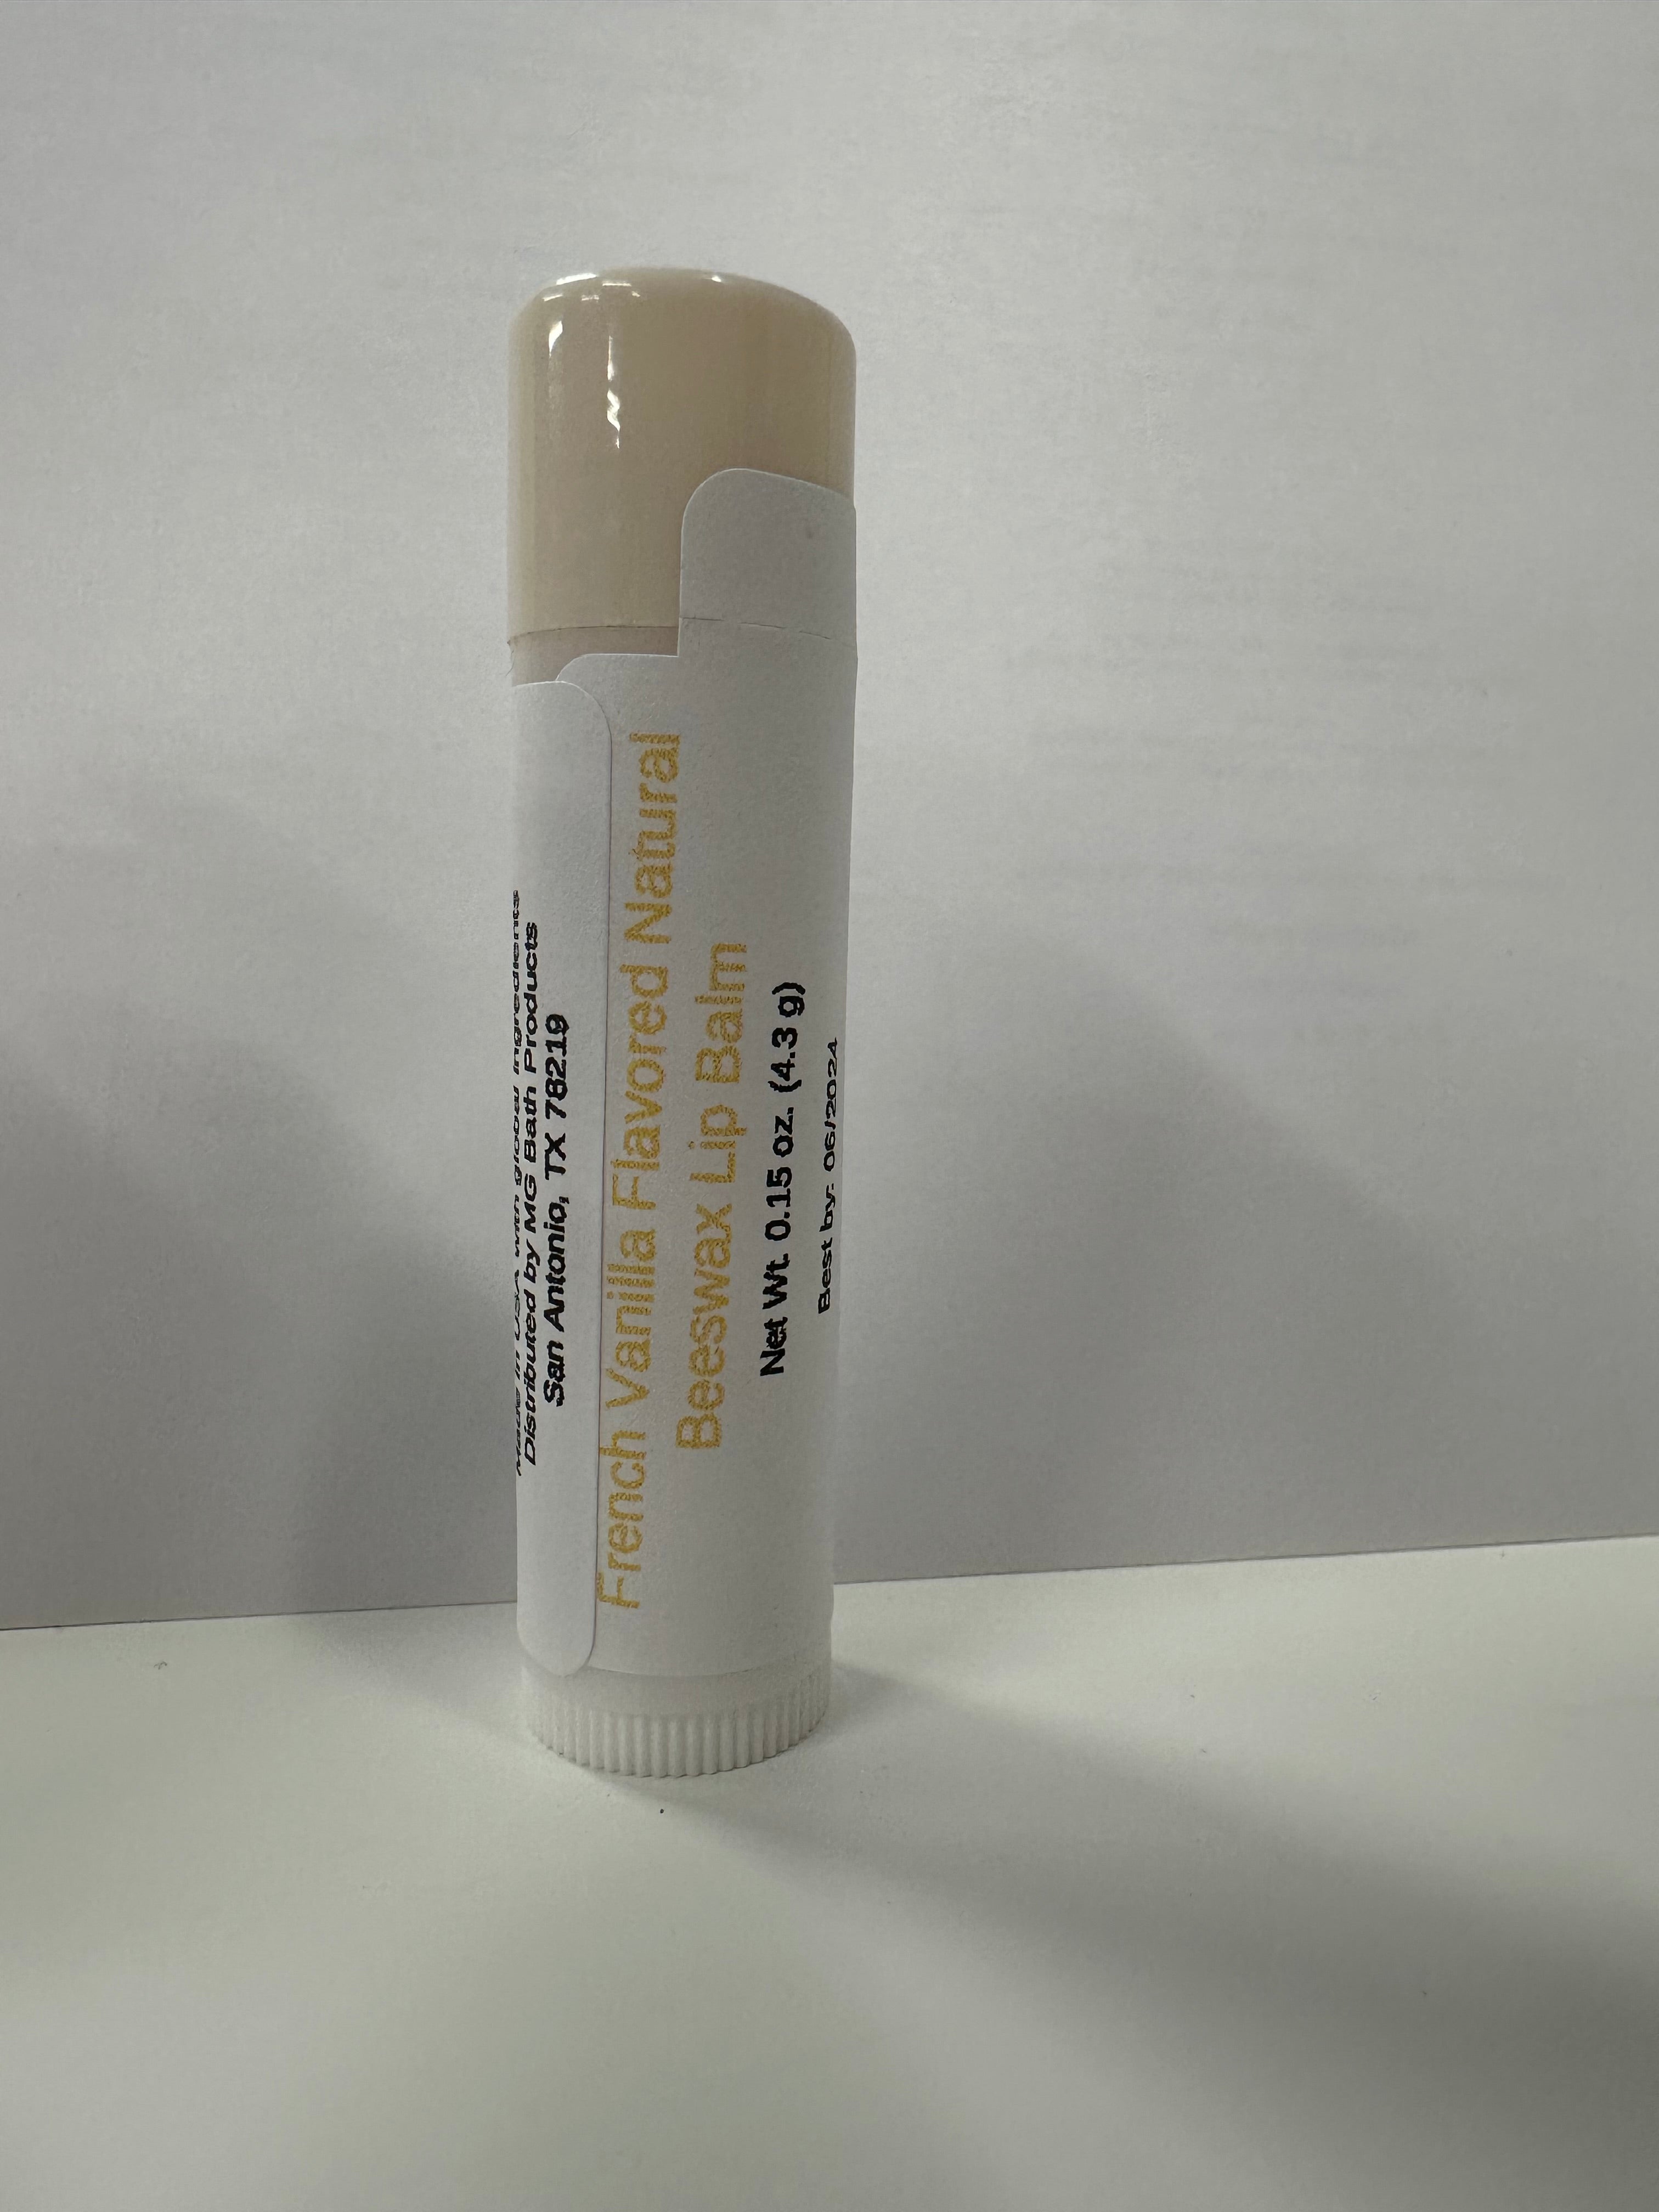 Lip balm in tube with beige colored cap on it.